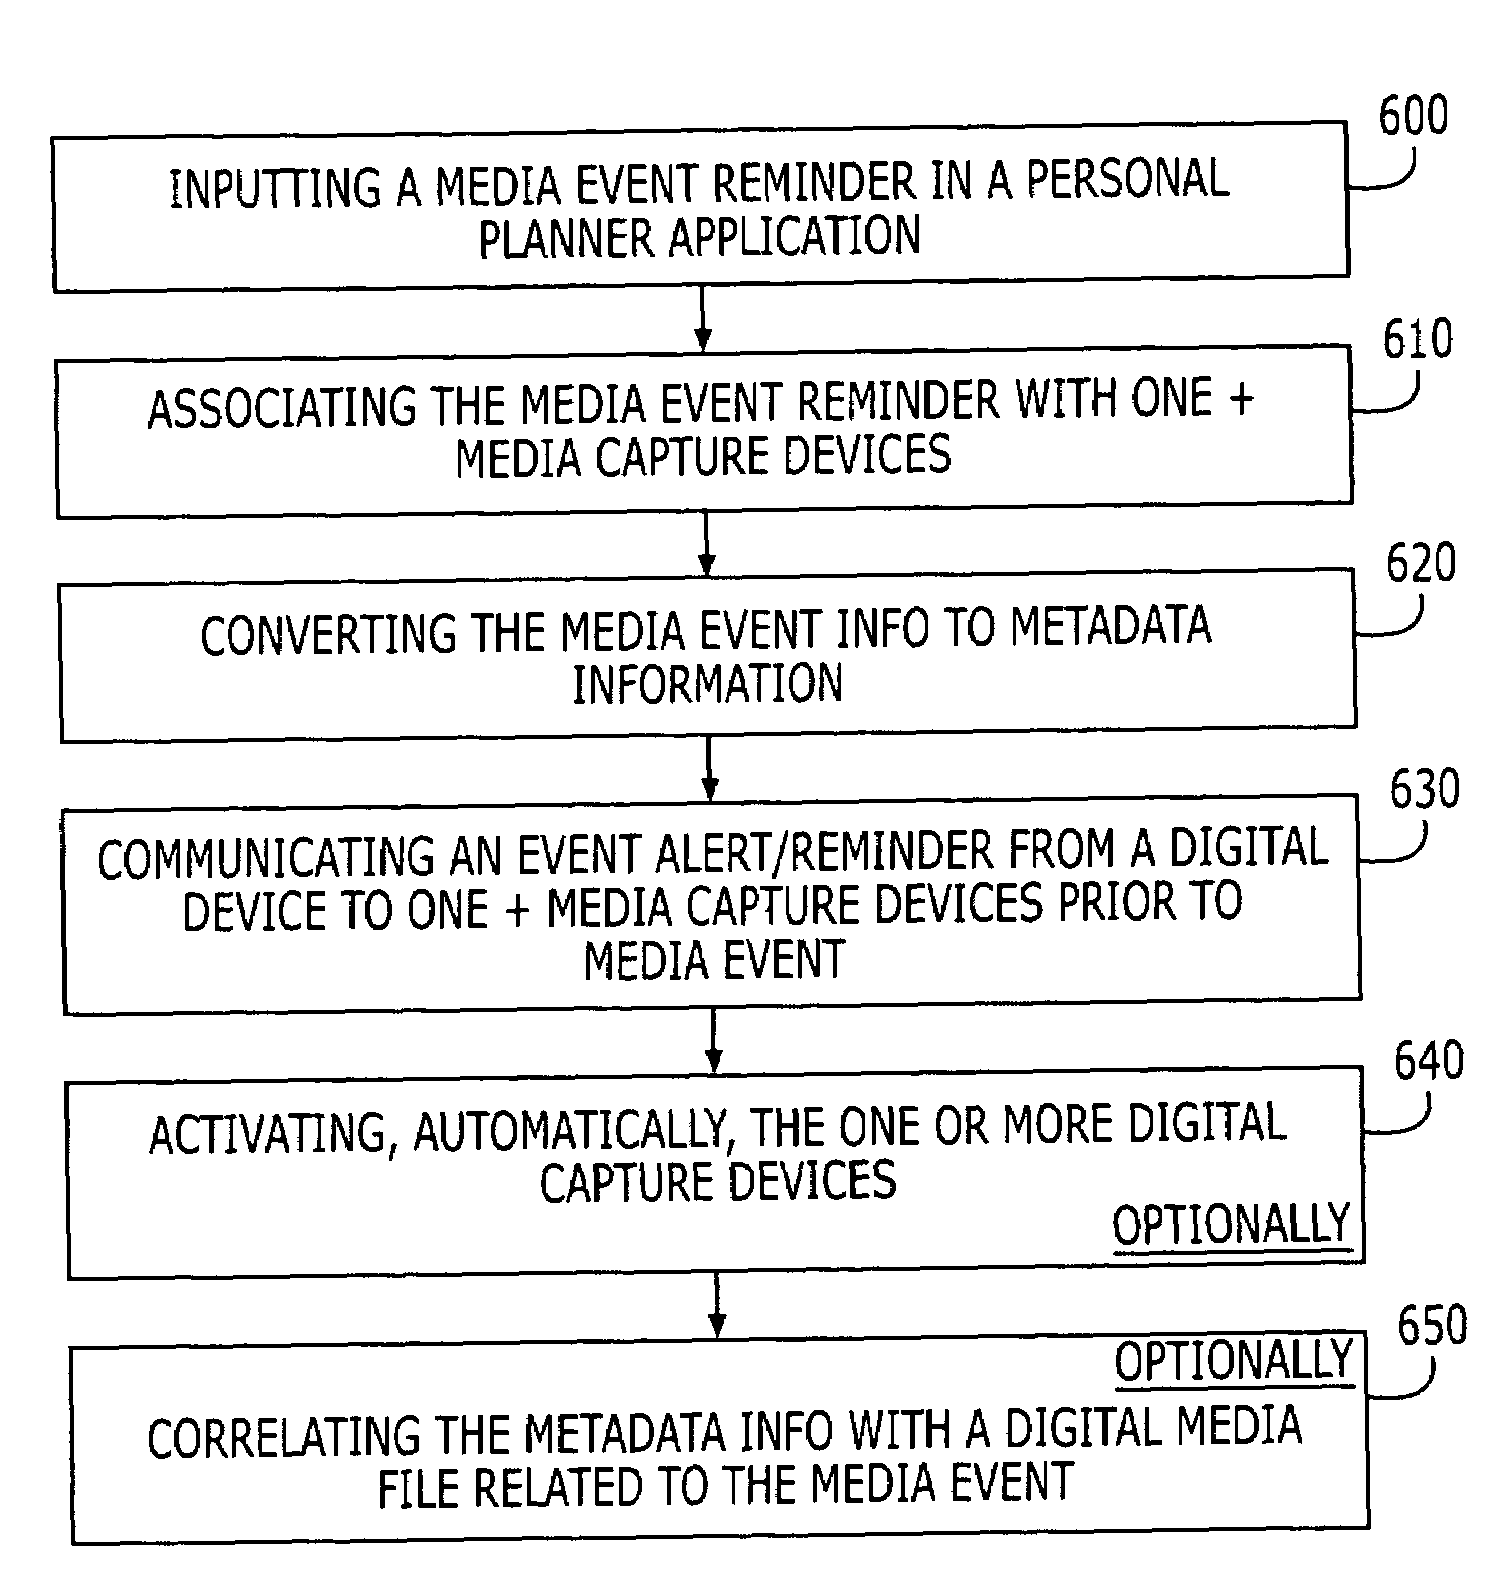 Applications and methods for providing a reminder or an alert to a digital media capture device